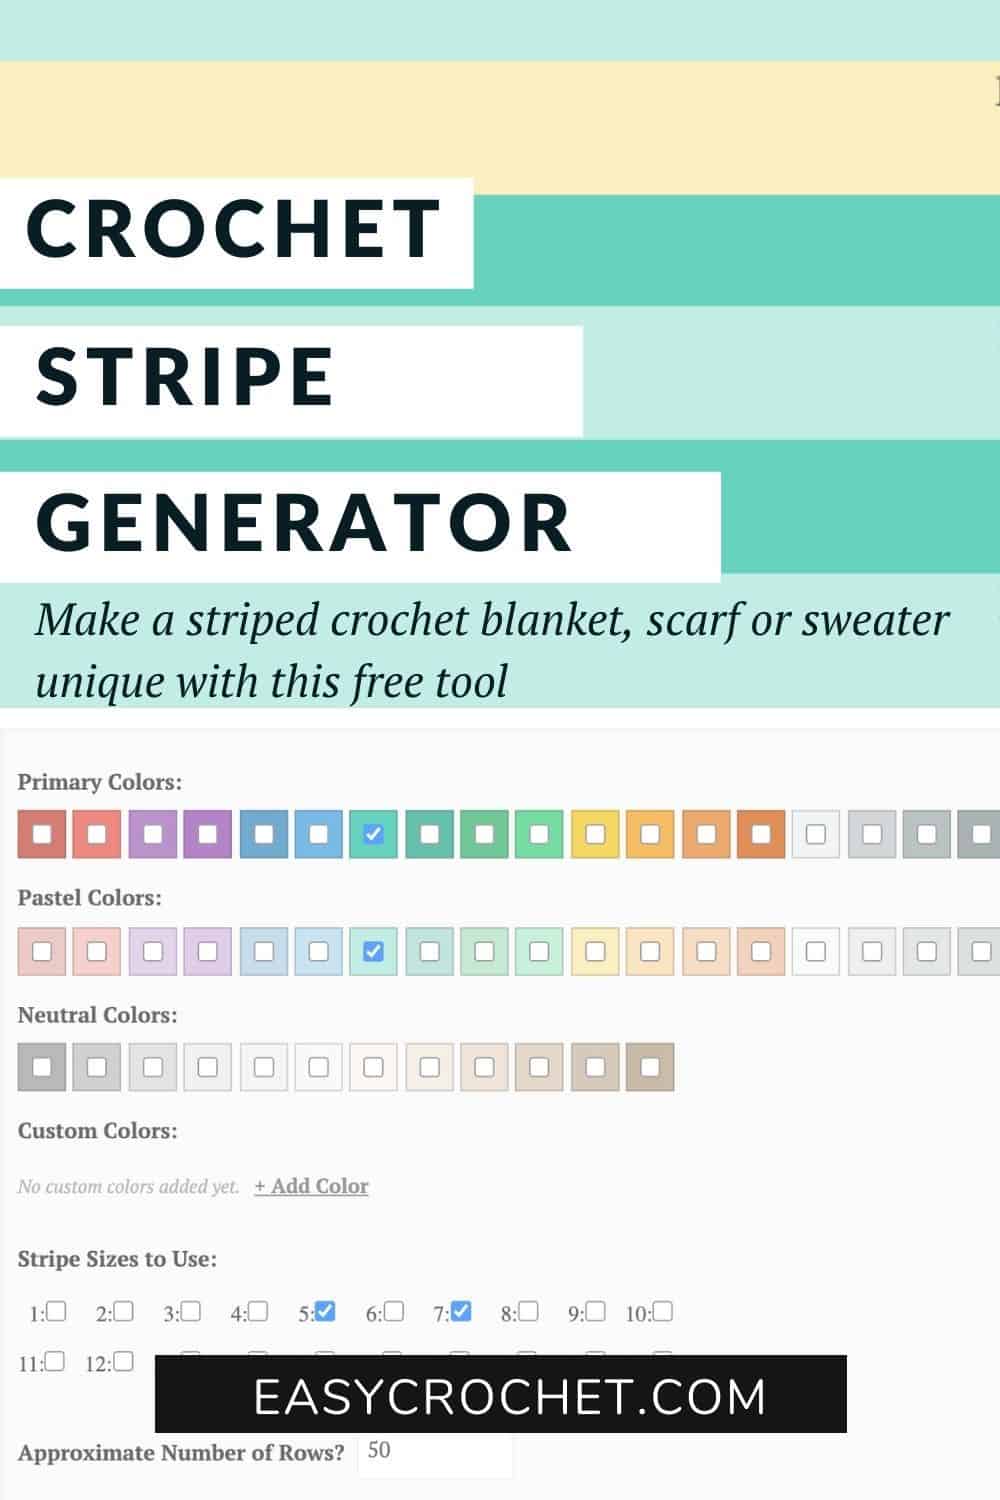 Free random crochet stripe generator! Make custom striped blankets, scarves and sweaters with this free tool! Once you design your striped pattern you can print and save for later! Free from easycrochet.com via @easycrochetcom